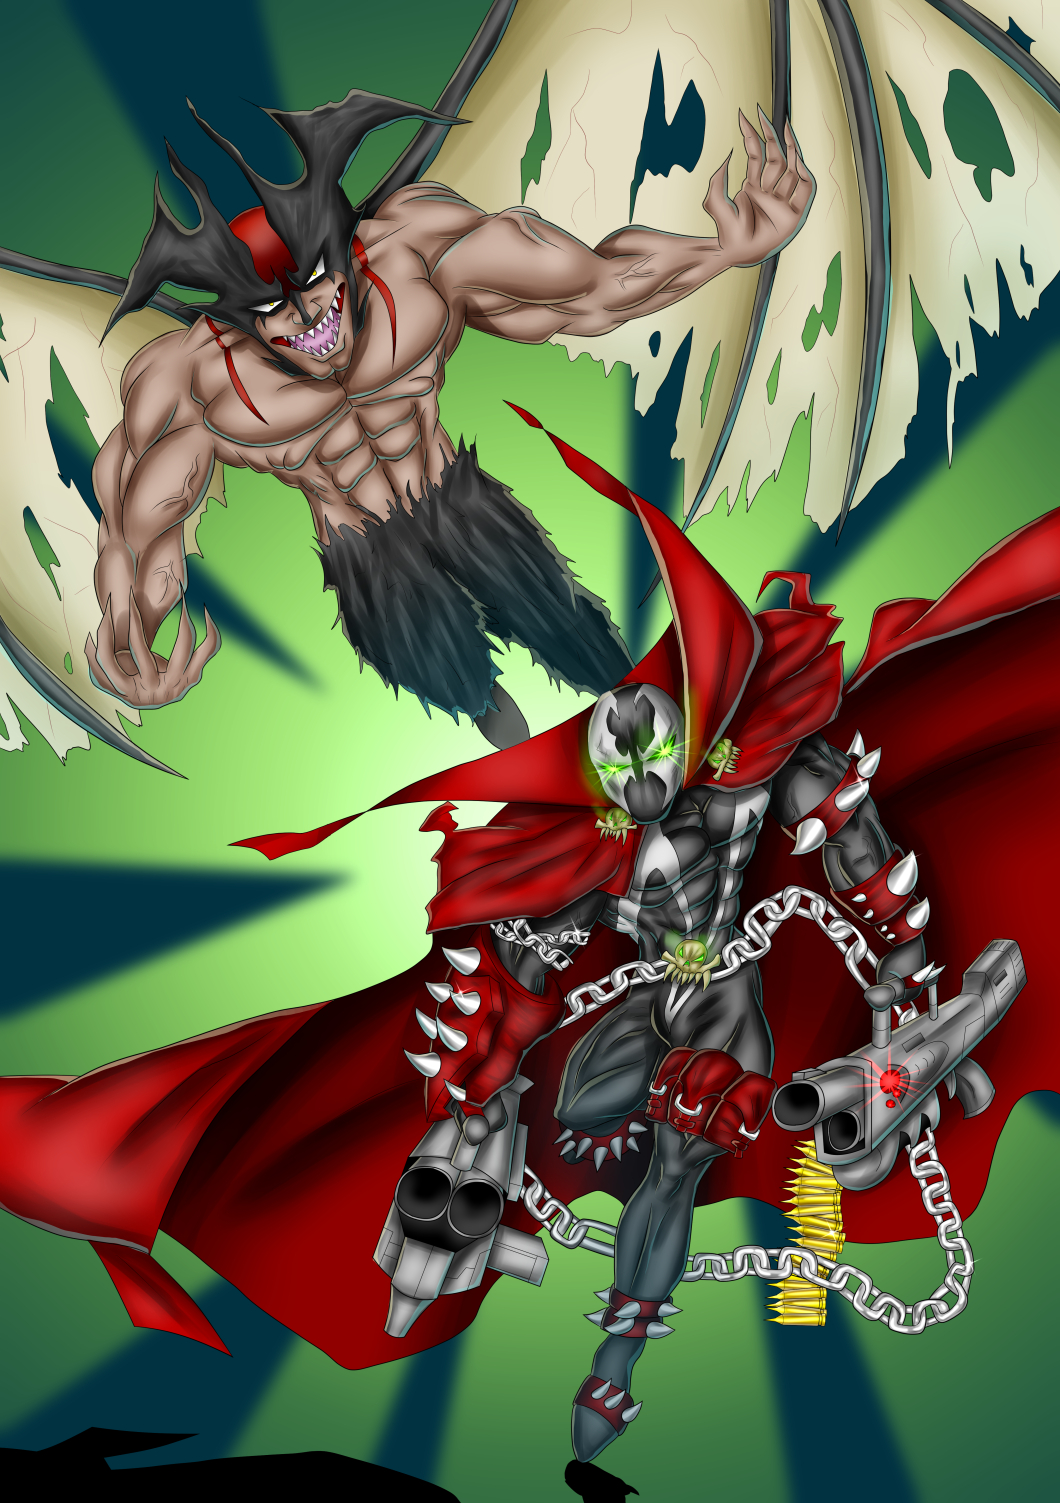 2boys cape chains claws crossover demon demon_wings devilman devilman_(character) glowing glowing_eyes green_eyes gun head_wings highres holding holding_gun holding_weapon image_comics kyuhri_miyazato male_focus mask multiple_boys skull spawn spawn_(spawn) spikes superhero tail weapon wings